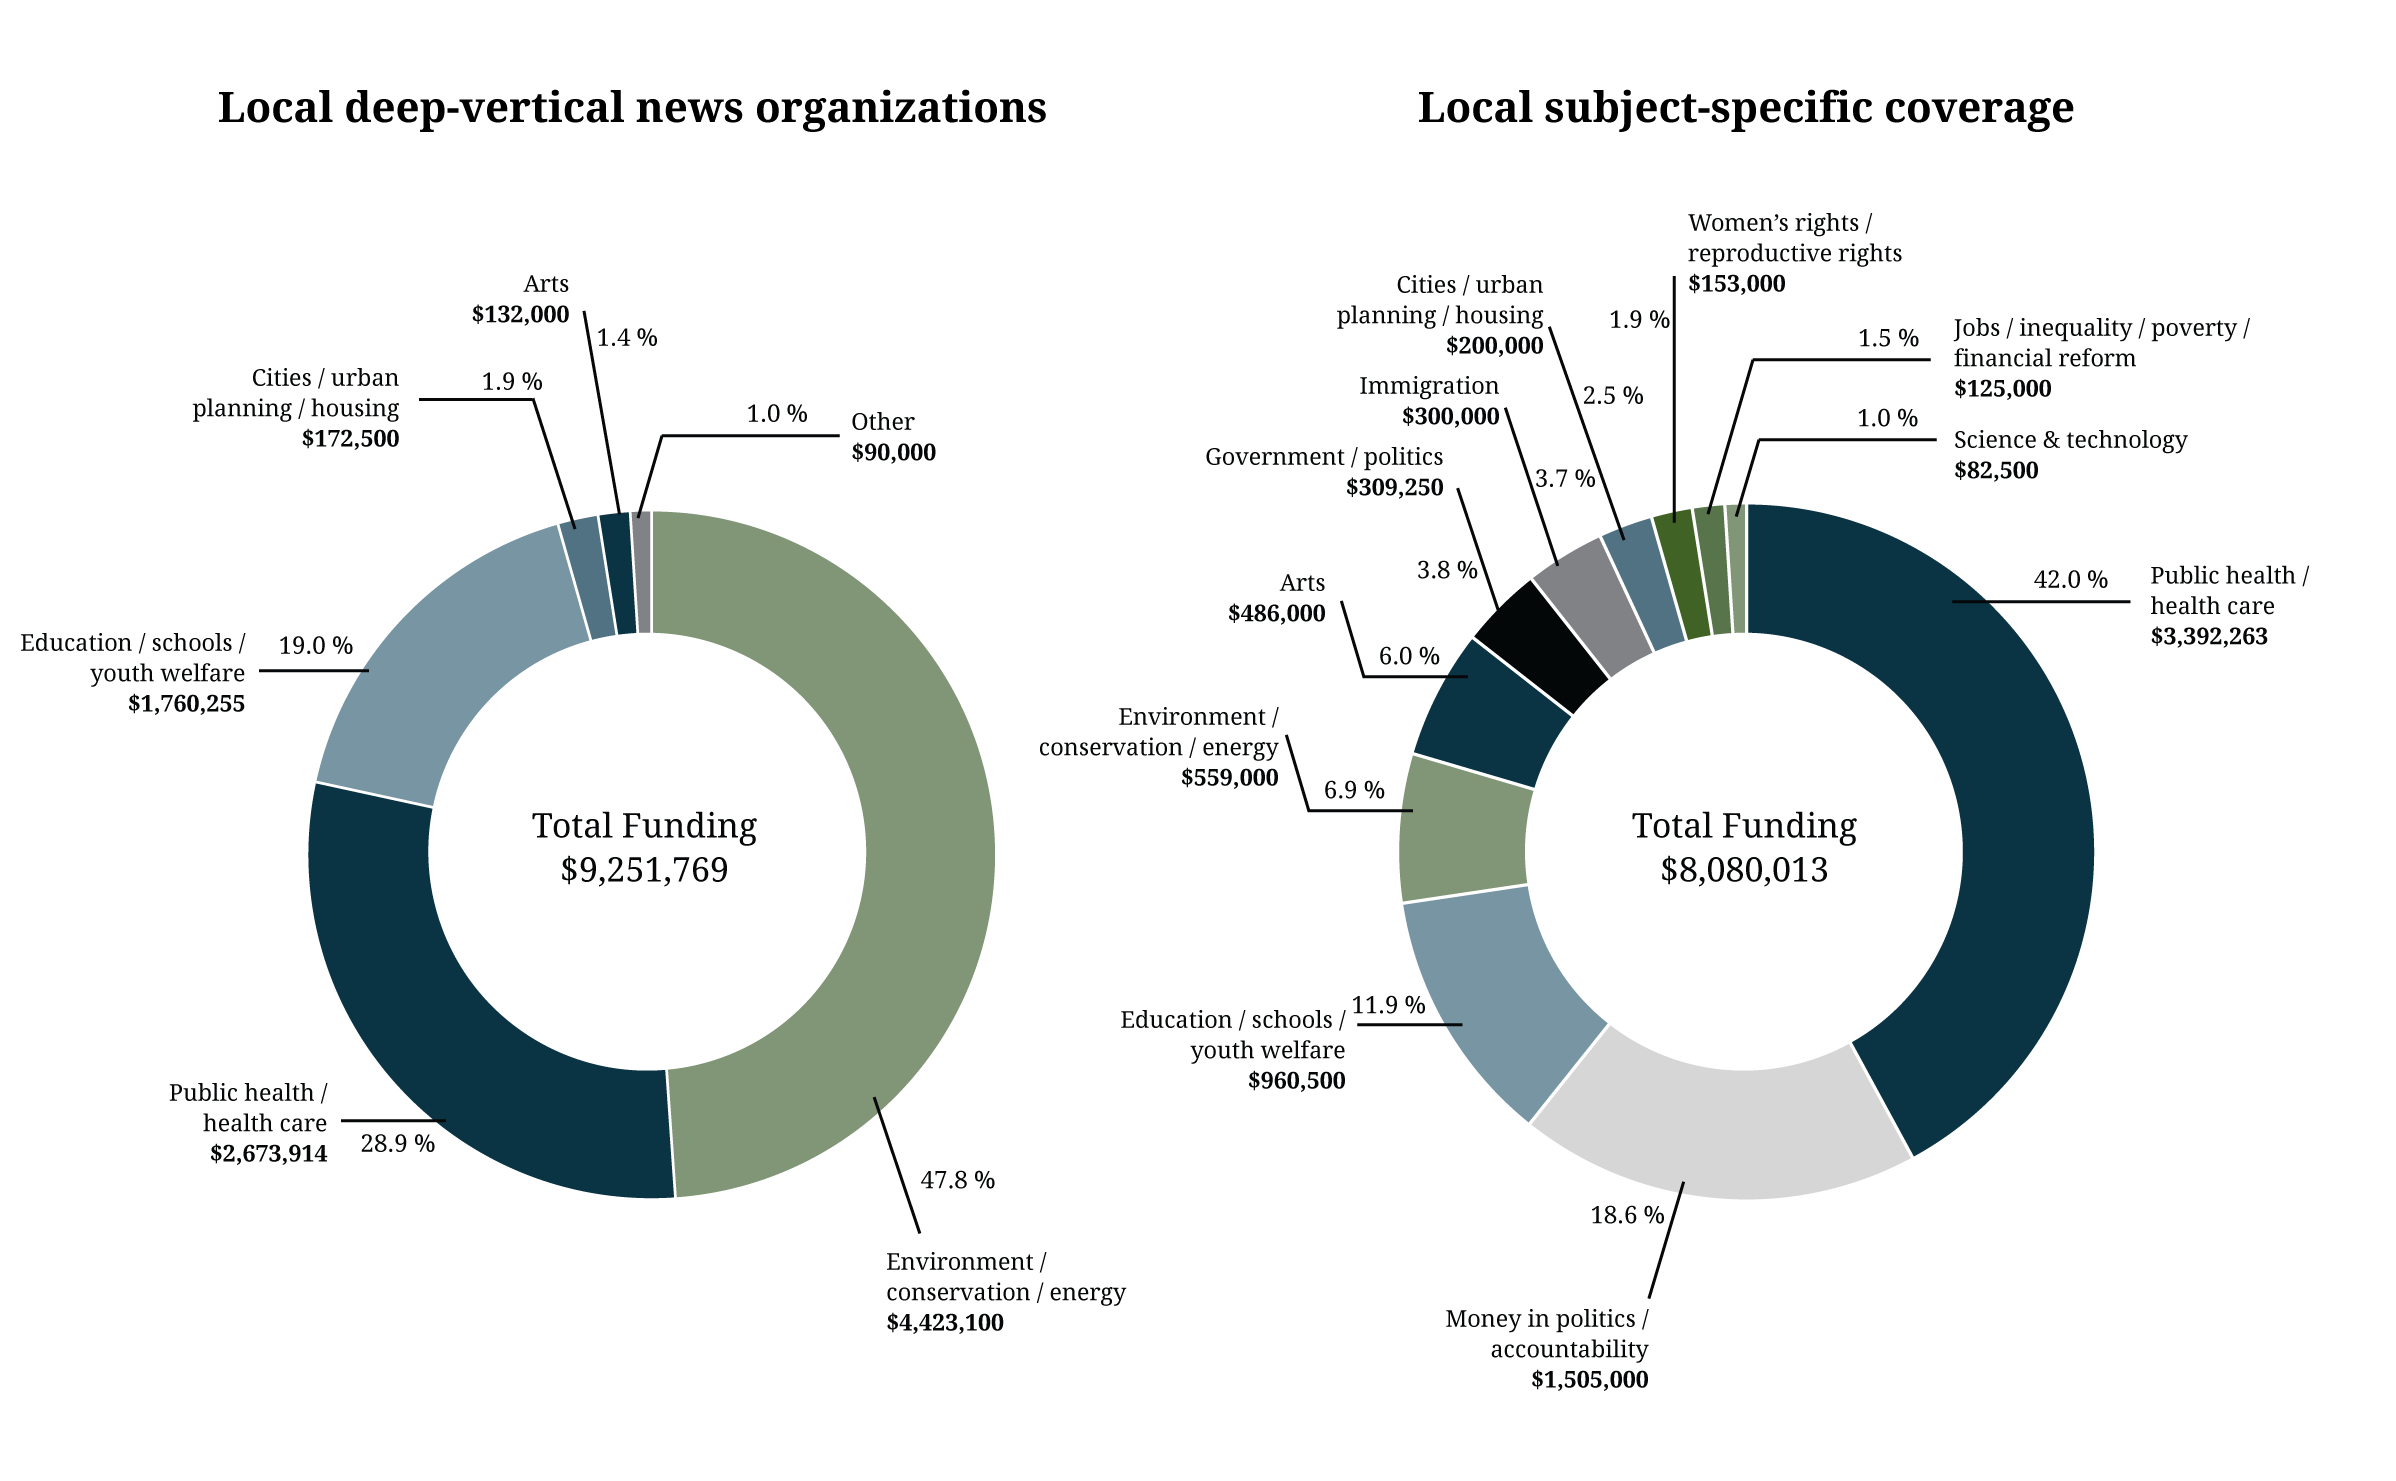 Figure 7. Deep vertical, subject specific foundation funding at local/state nonprofits, 2010-2015